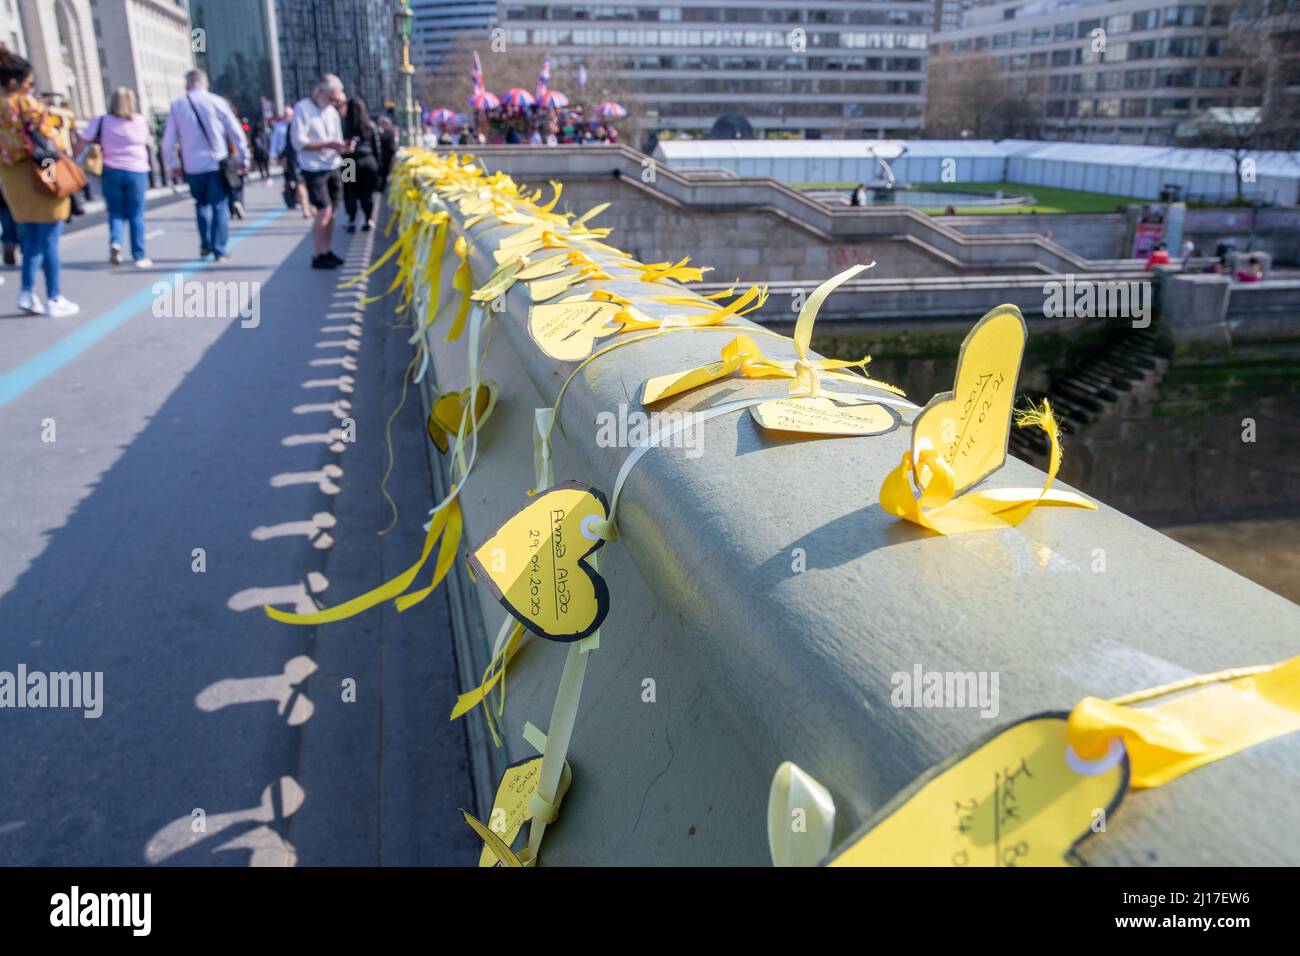 LONDON, MARCH 23 2022, COVID-19 Families for Justice hold a minute silence on Westminster Bridge on the 2nd anniversary of the first lockdown in the UK, so far 160,000 people have died from Coronavirus in the UK. Credit: Lucy North/Alamy Live News Stock Photo